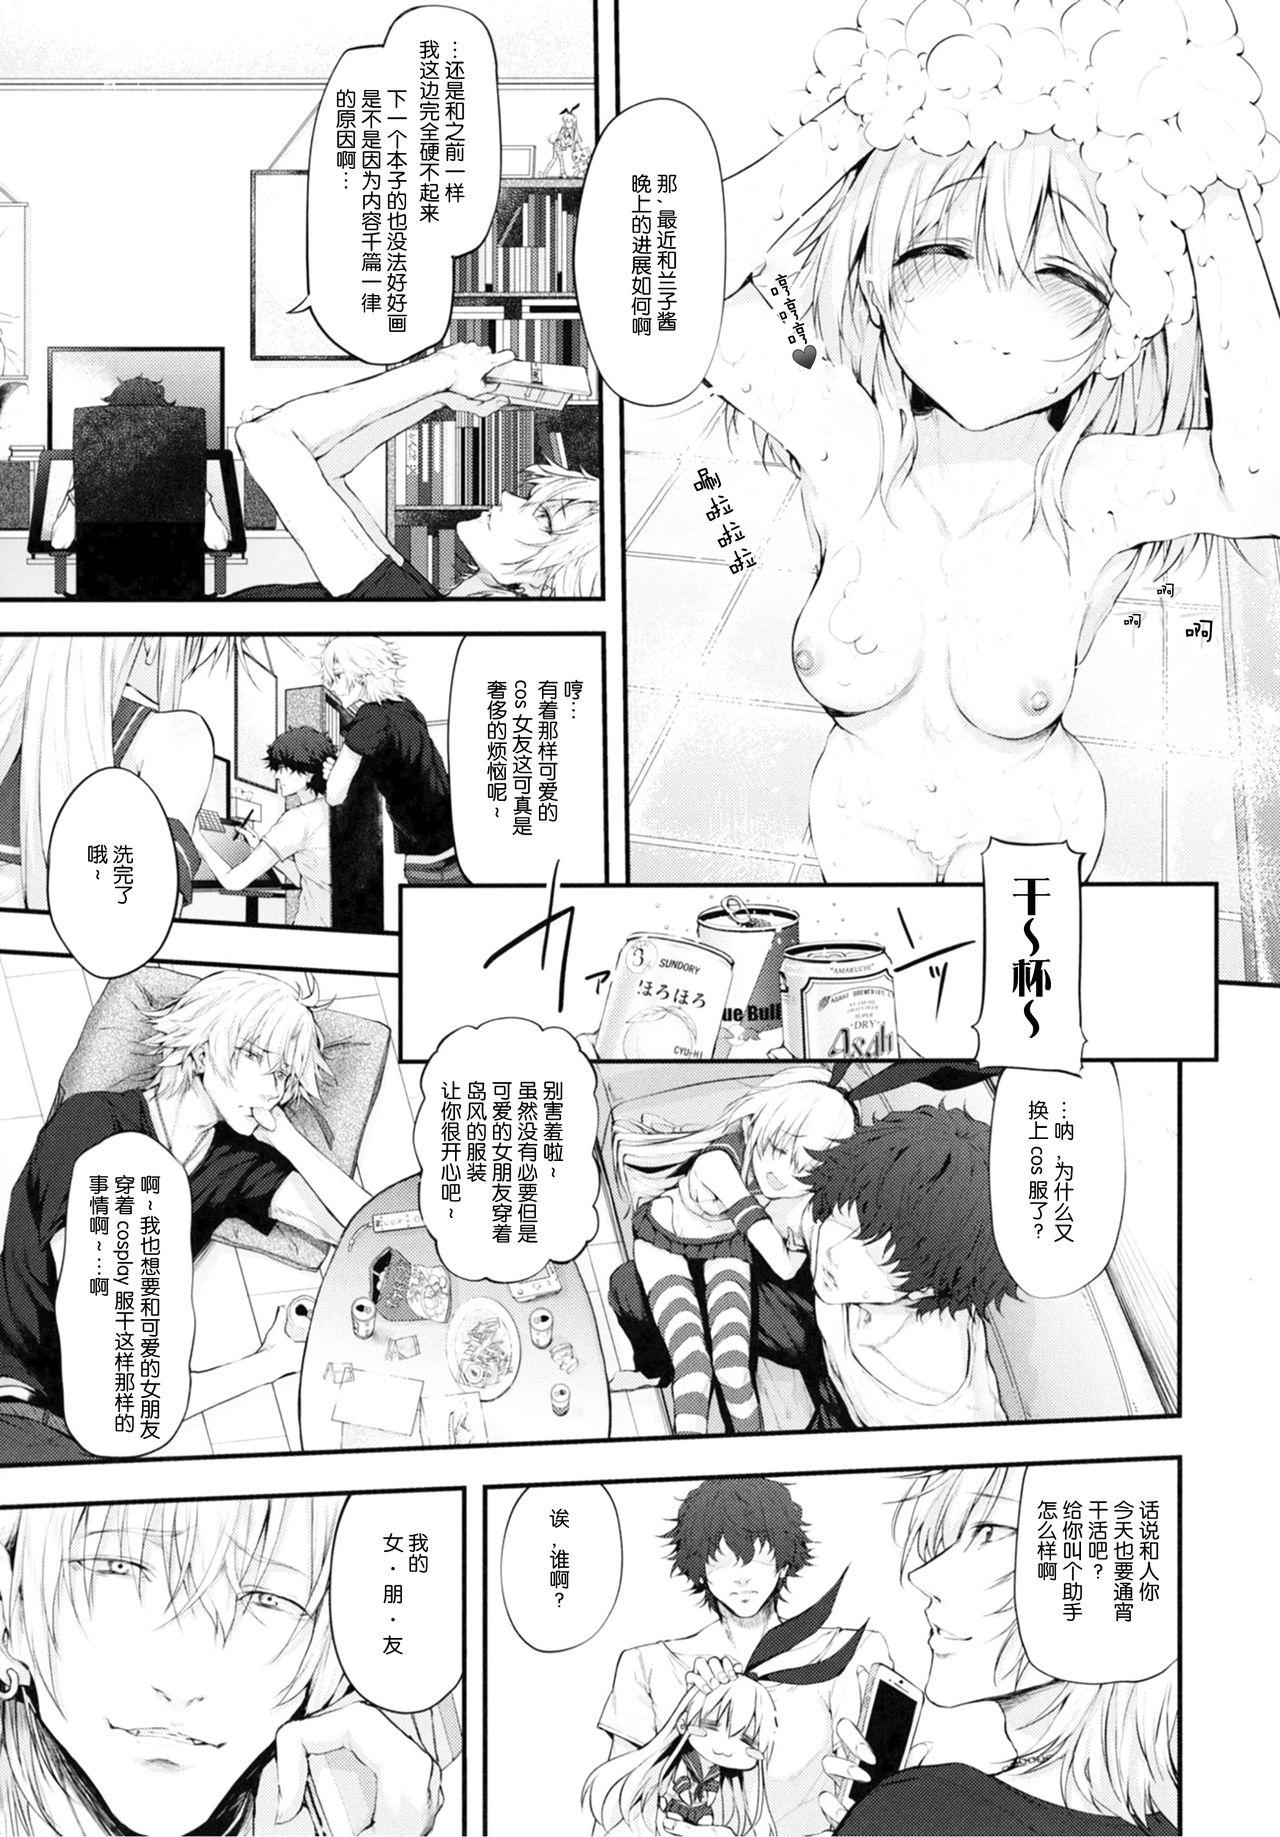 Gostoso COSBITCH! Marked-girls Origin Vol. 1 - Kantai collection Husband - Page 5